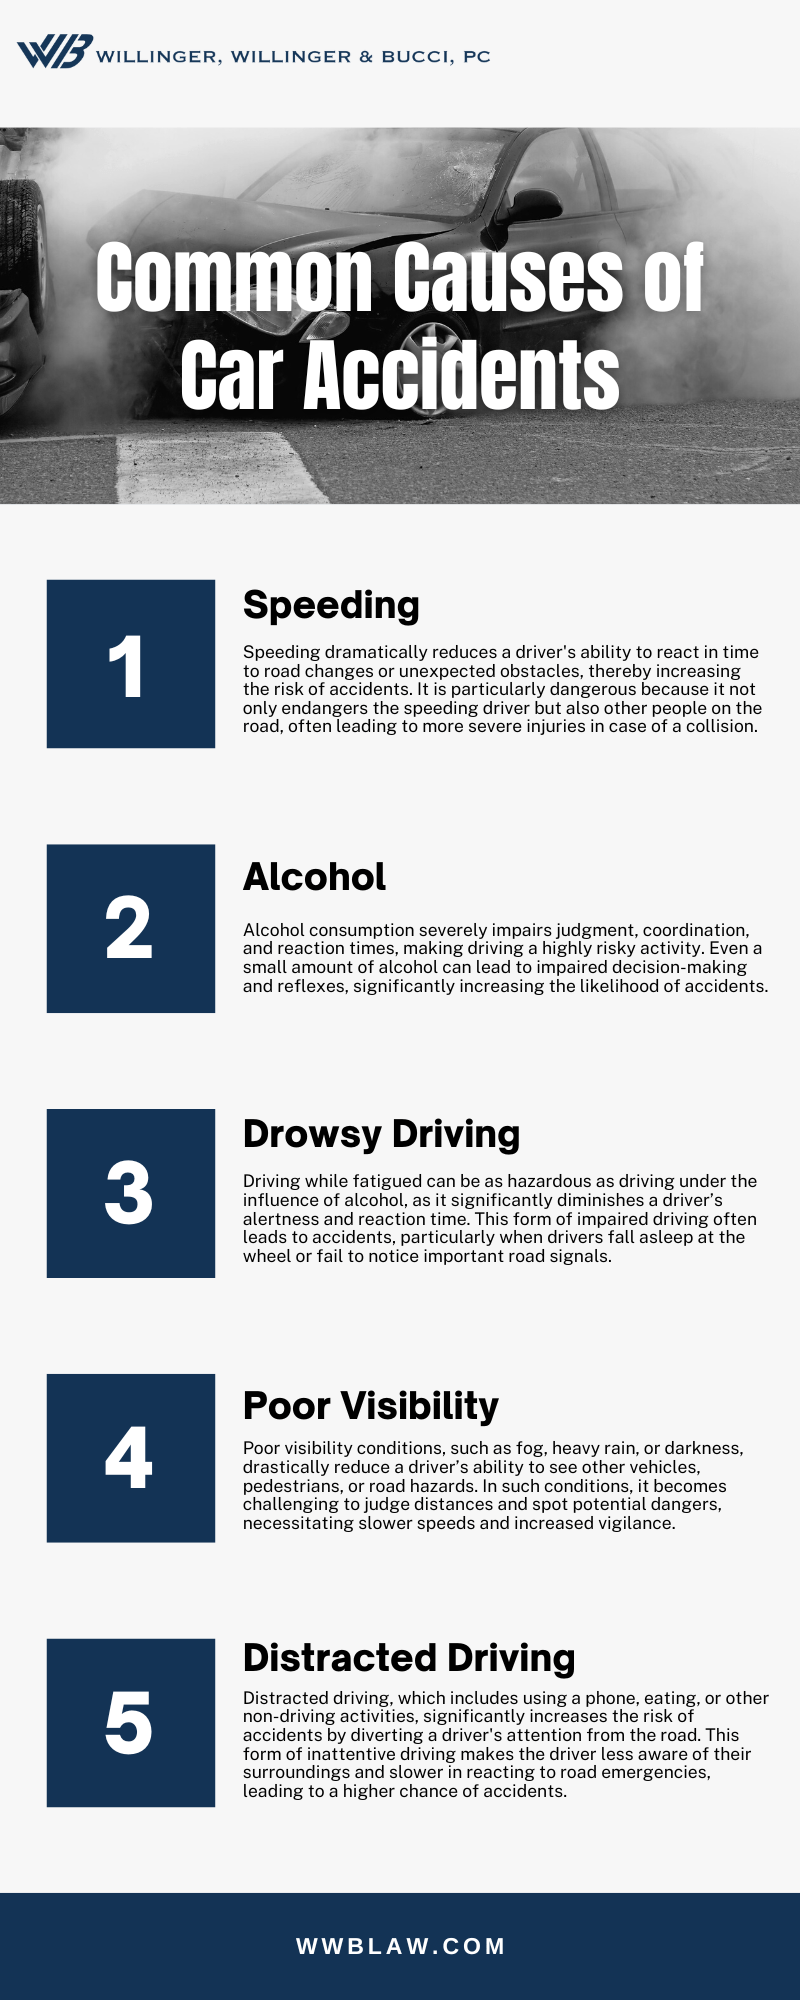 Common Causes of Car Accidents Infographic